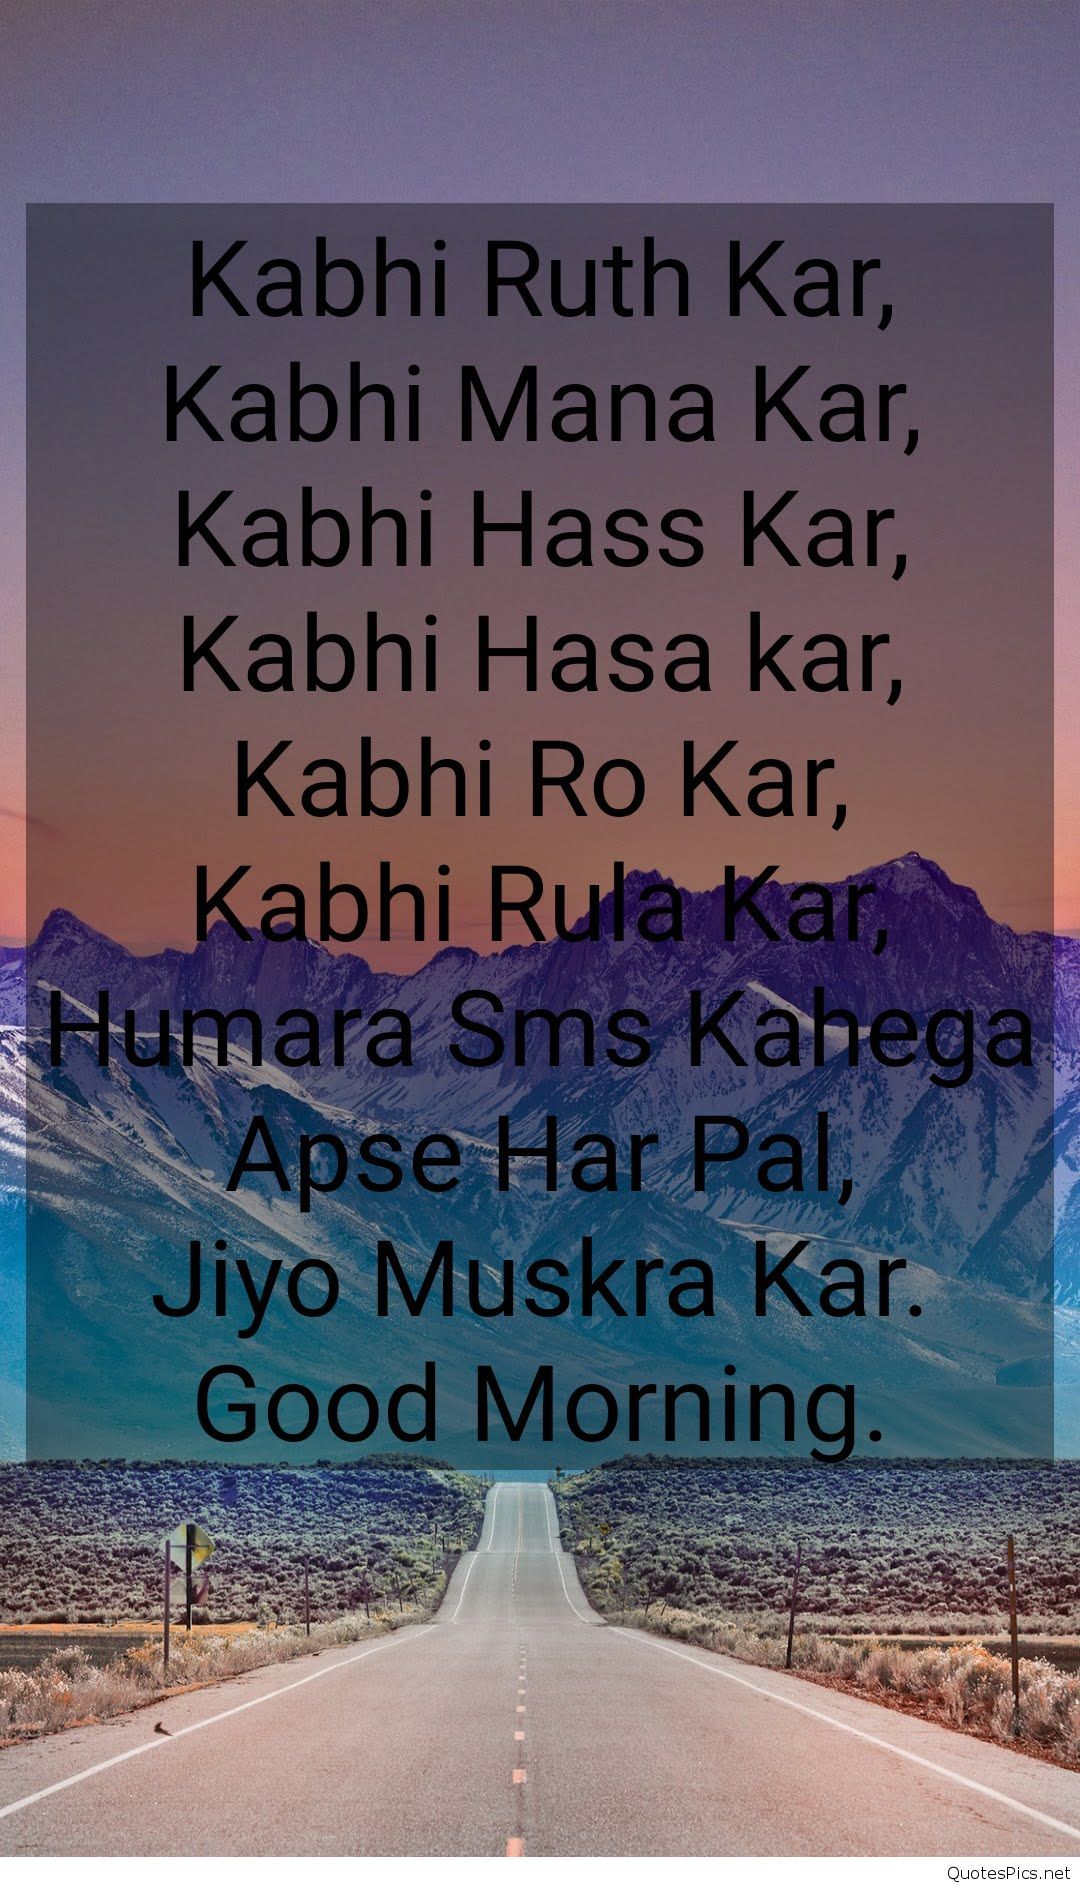 Inspirational Quotes Good Morning Hindi With In Images - Inspiration Good Morning Quote Hindi , HD Wallpaper & Backgrounds